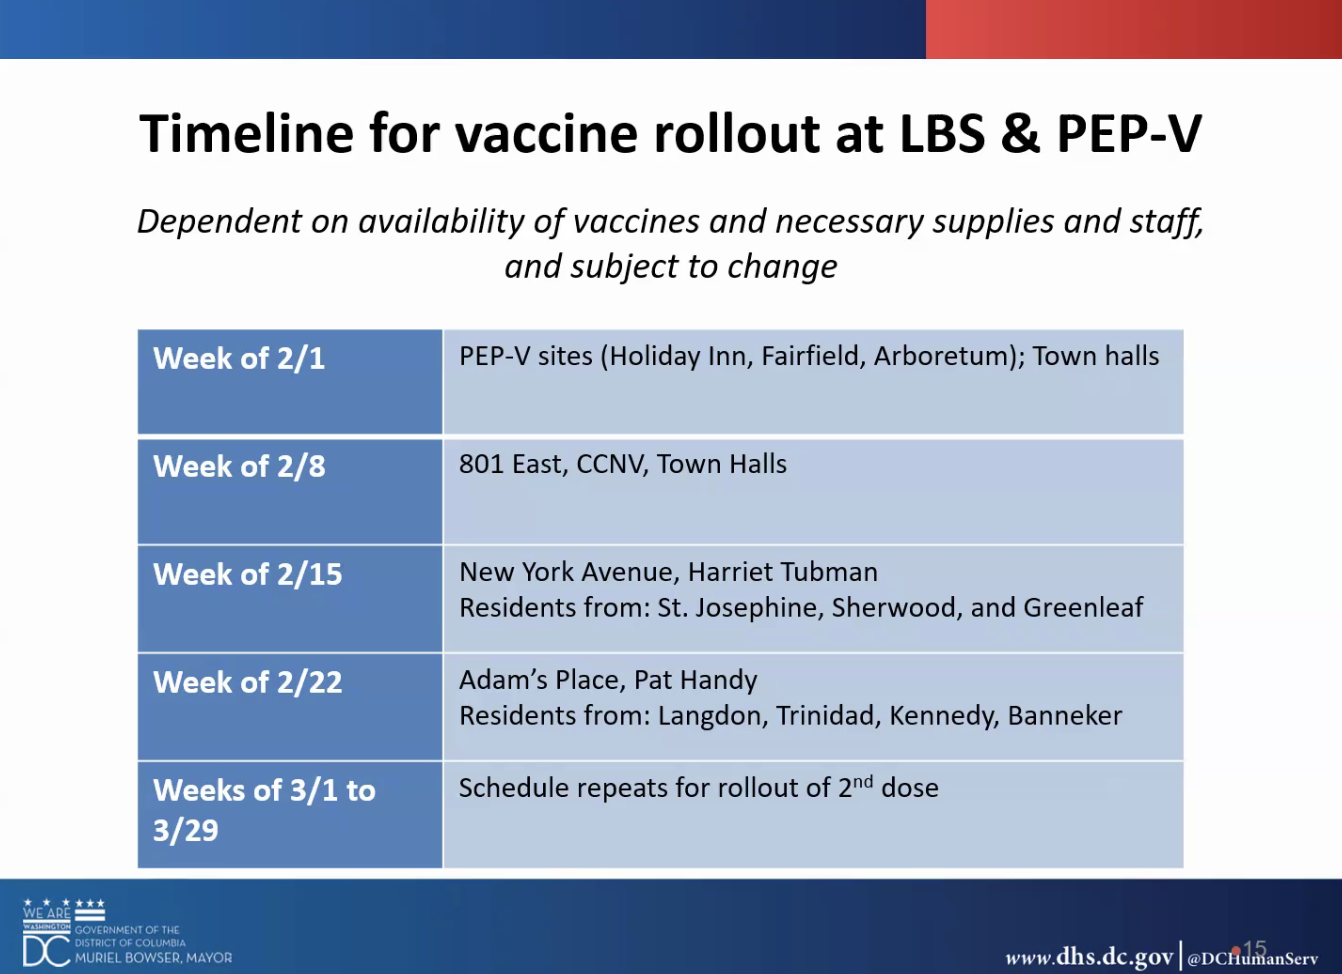 Vaccine schedule for February. Week of 2/1 will be PEP-V sites. Week of 2/8 will be 801 East and CCNV. Week of 2/15 will be New York Avenue, Harriet Tubman, and residents from St. Josephine, Sherwood and Greenleaf. Week of 2/22 will be Adam's Place, Pat Handy, and residents from Langdon, Trinidad, Kennedy and Banneker. Week of 3/1 to 3/29, the second dose will be administered following the same pattern. 